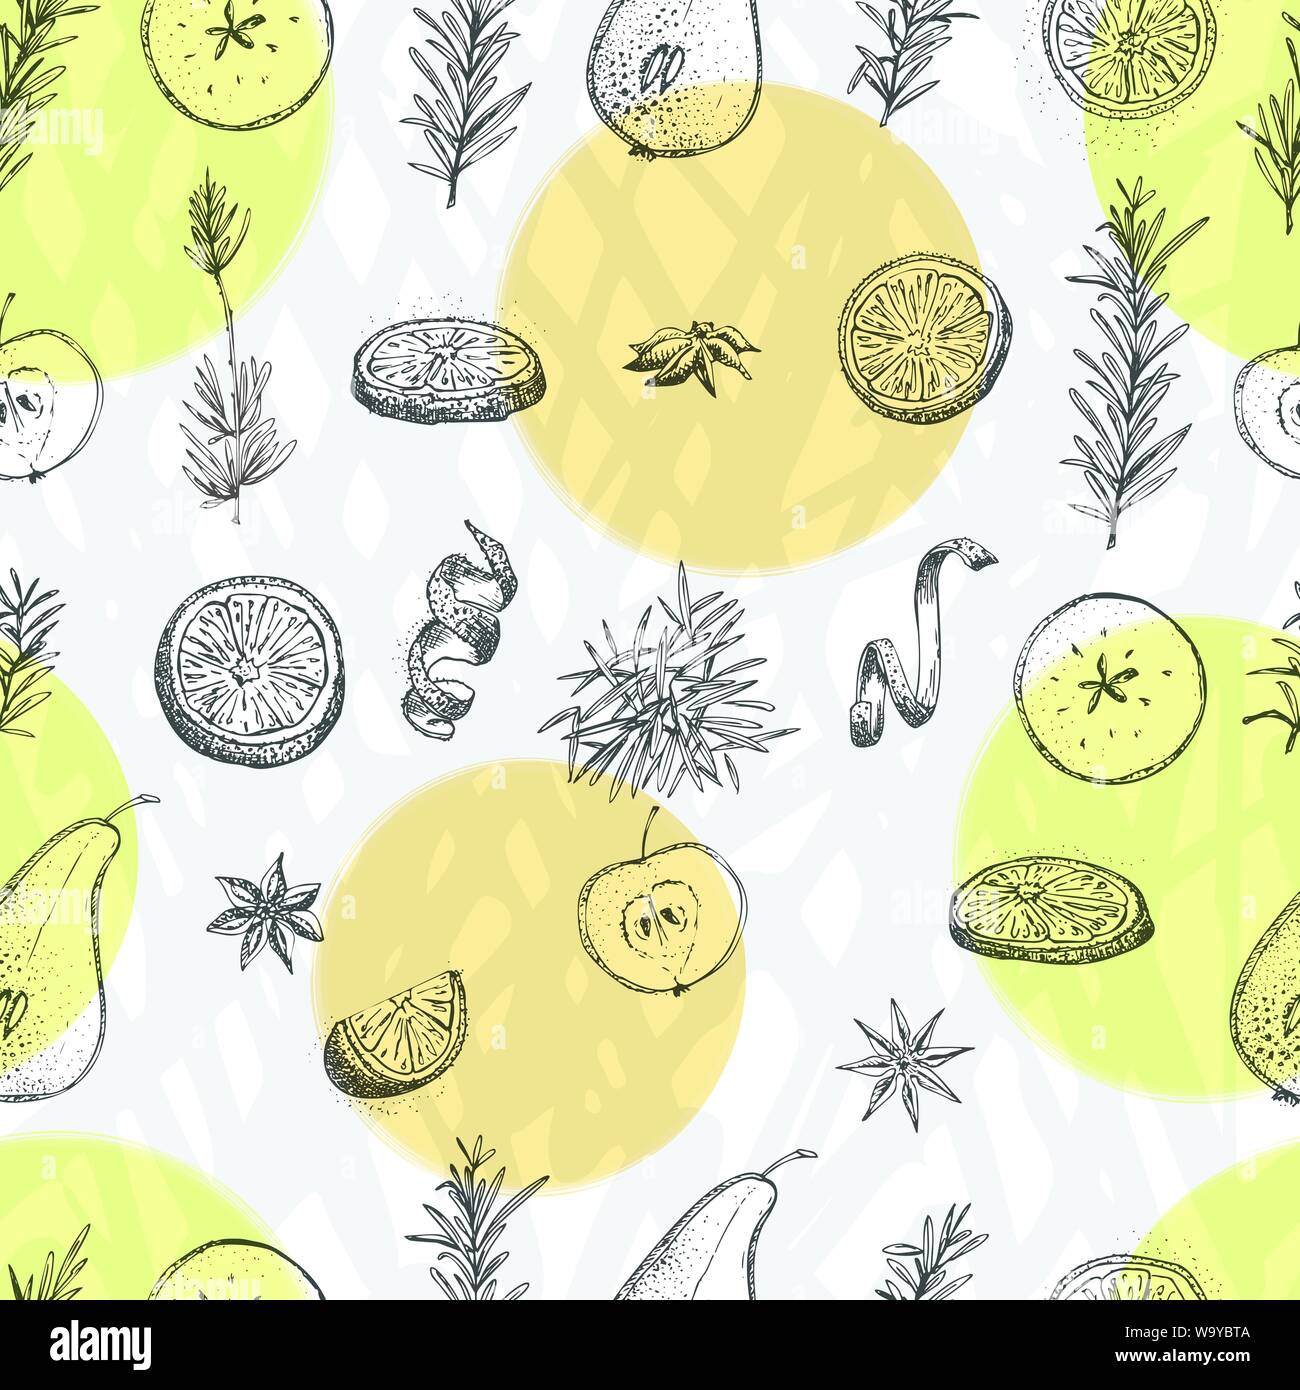 Seamless pattern with hand drawn Christmas winter spices, orange slices, pear, apple, rosemary. Good idea for templates menu, recipes, greeting cards. Stock Vector